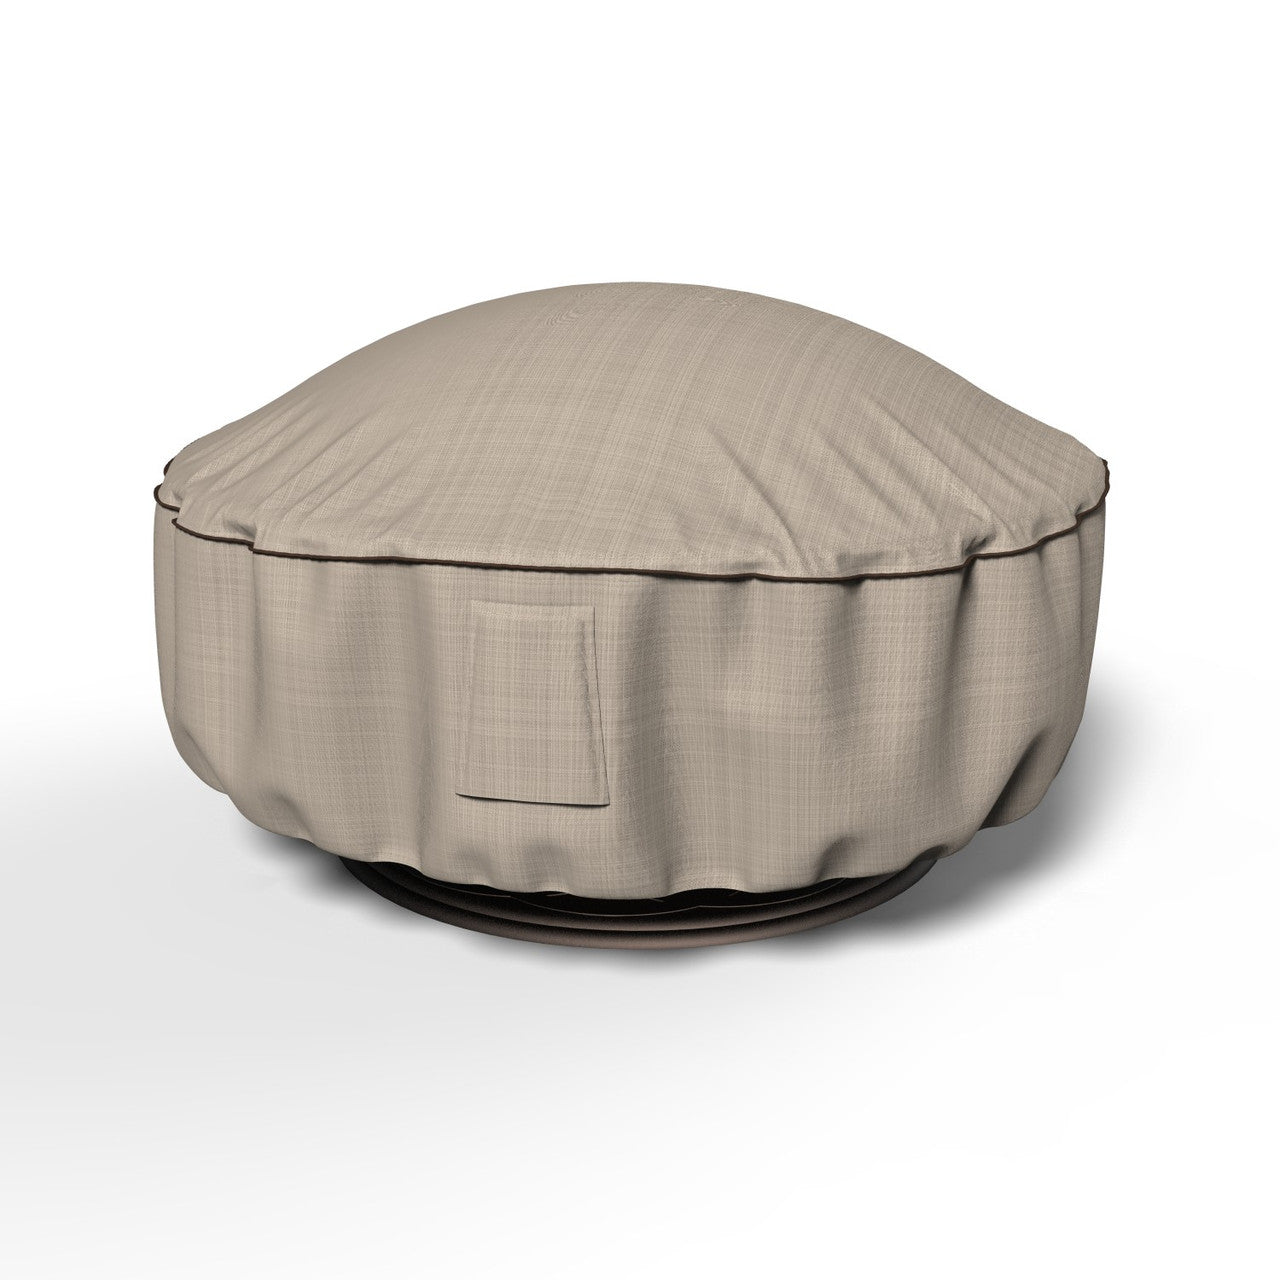 Budge Industries English Garden Firepit Cover